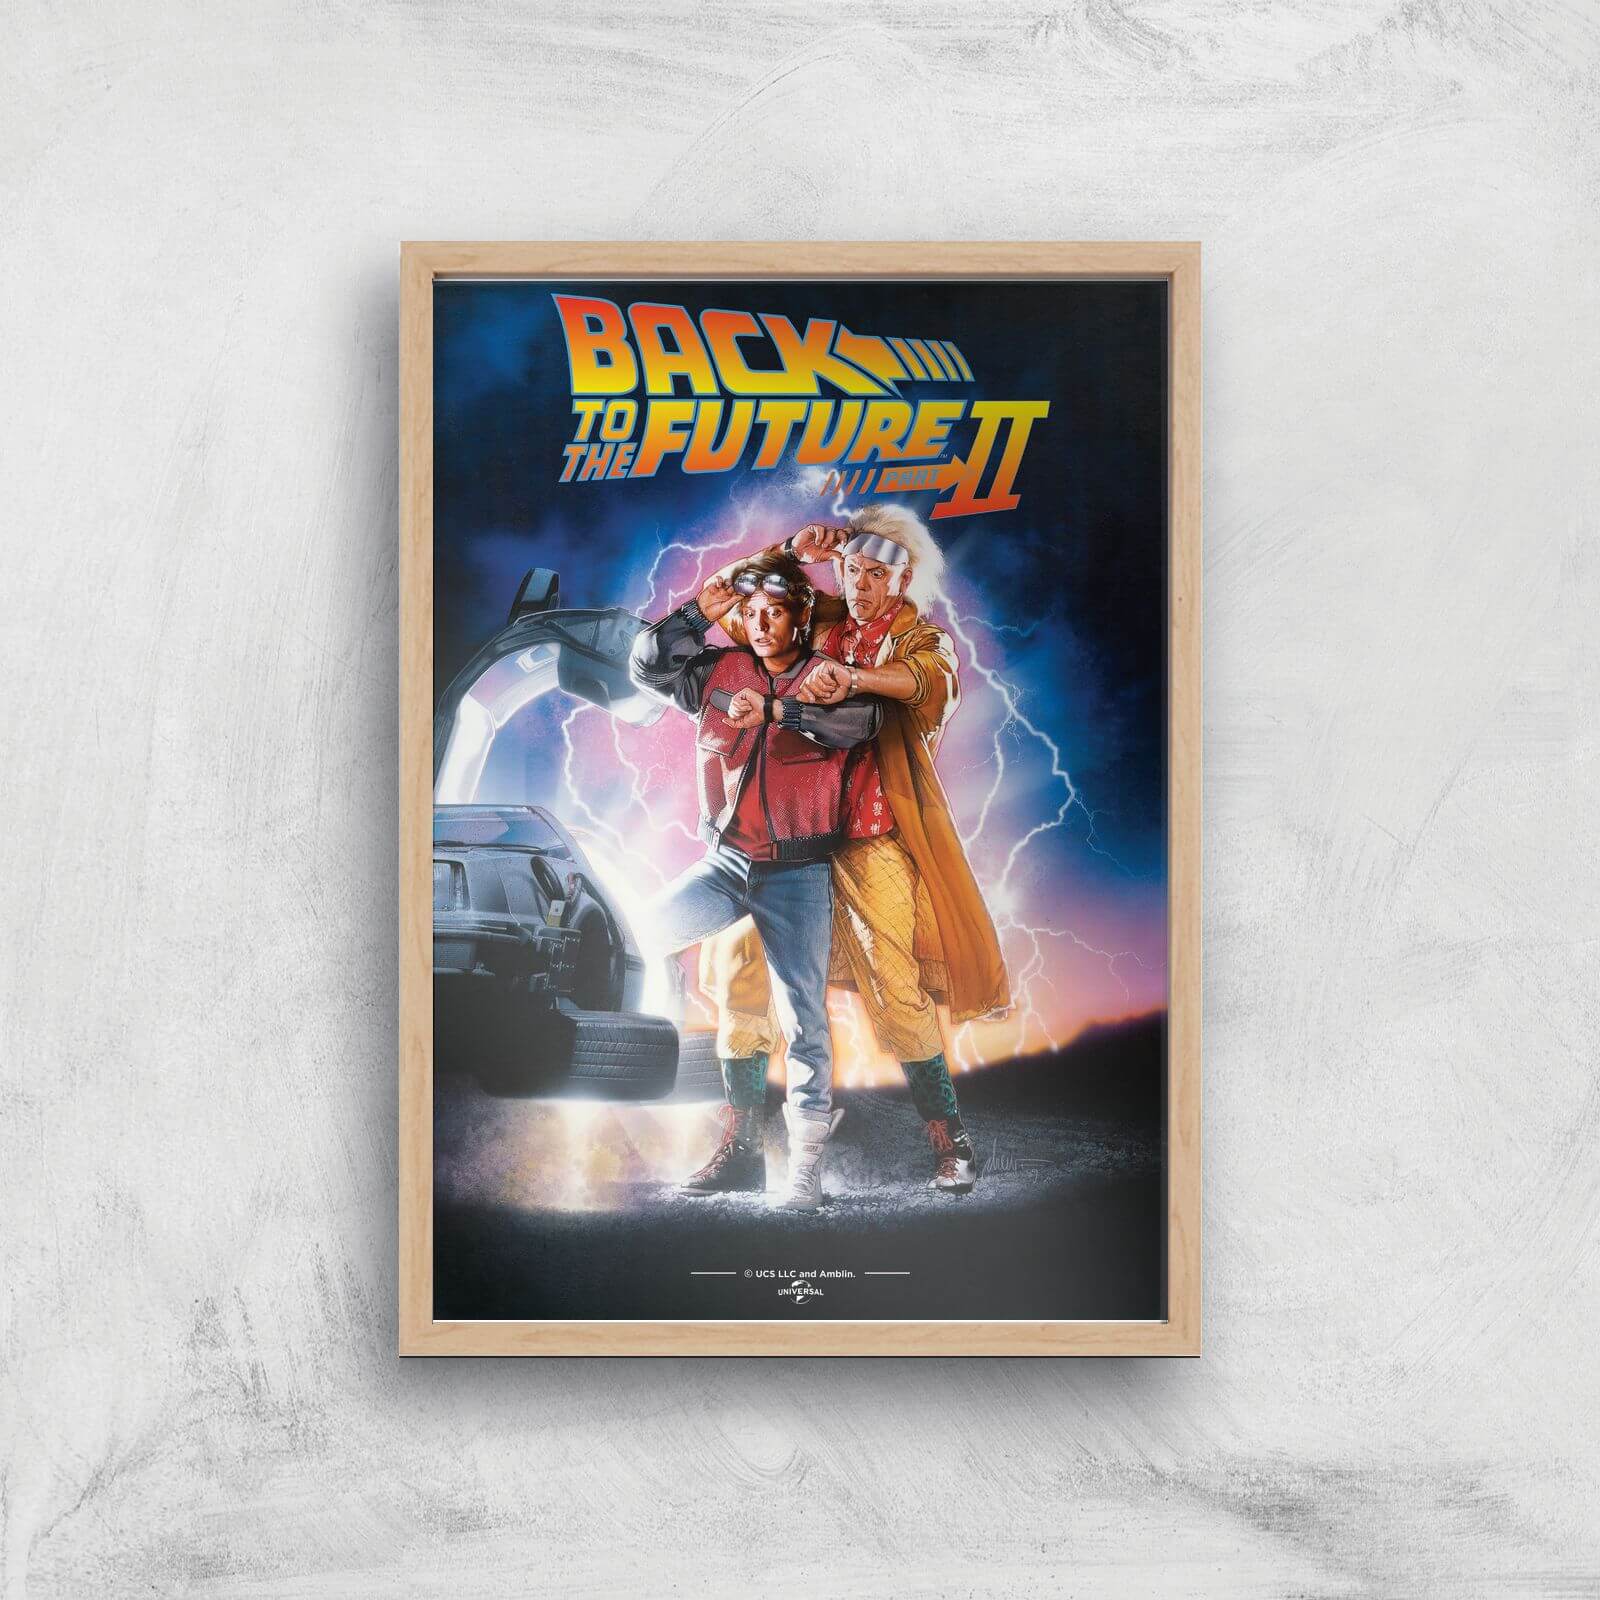 Back To The Future Part 2 Giclee Art Print - A3 - Wooden Frame